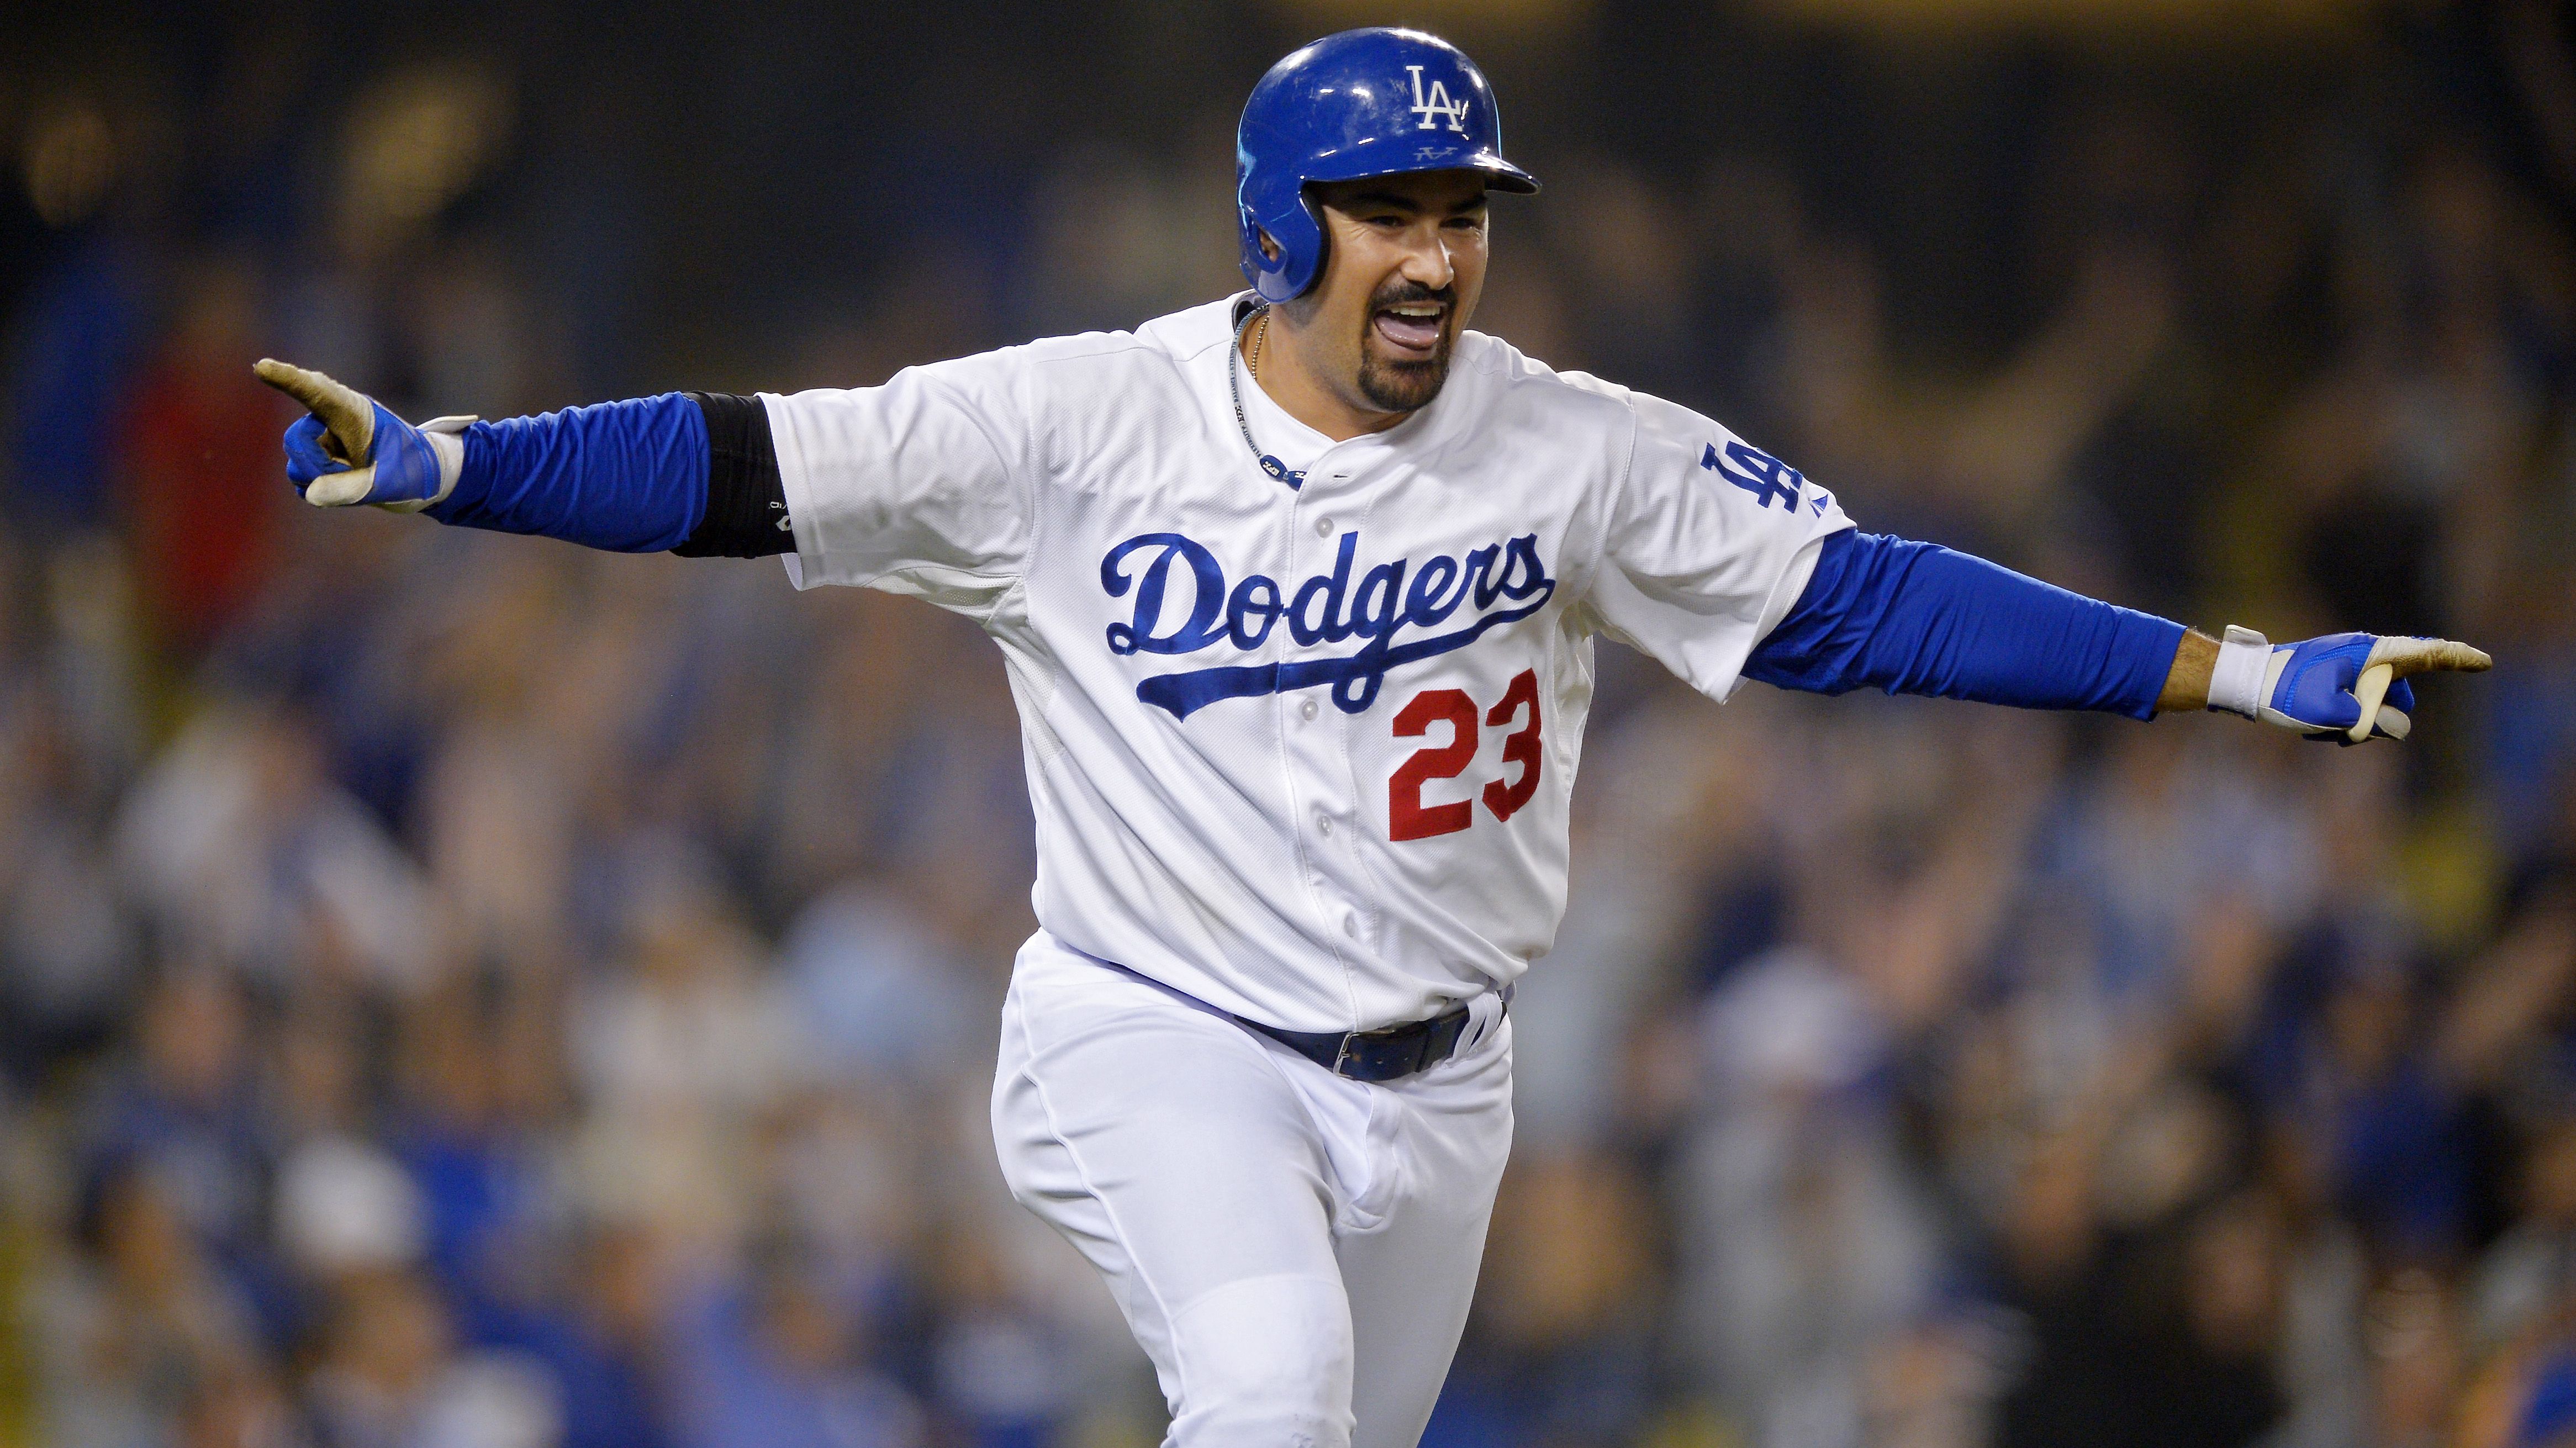 Upcoming Appearance: Adrian Gonzalez at Cross Training An Evening